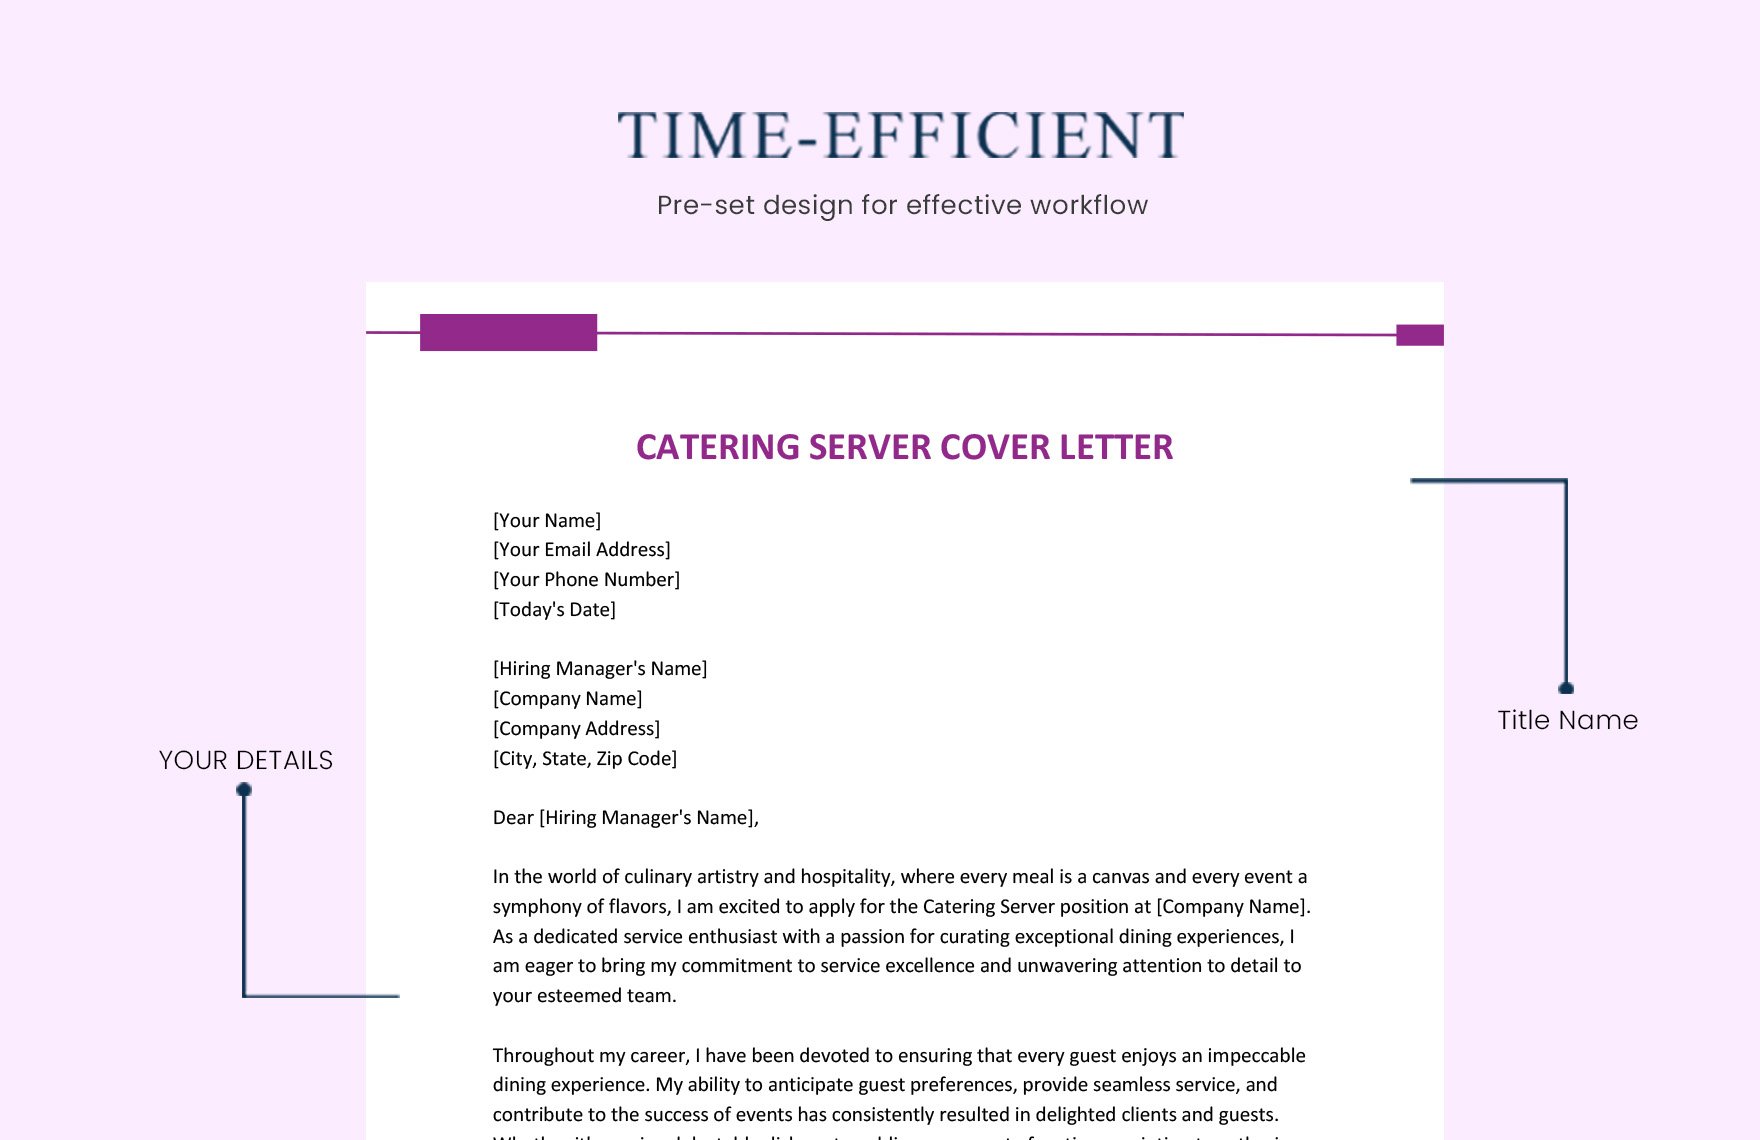 Catering Server Cover Letter